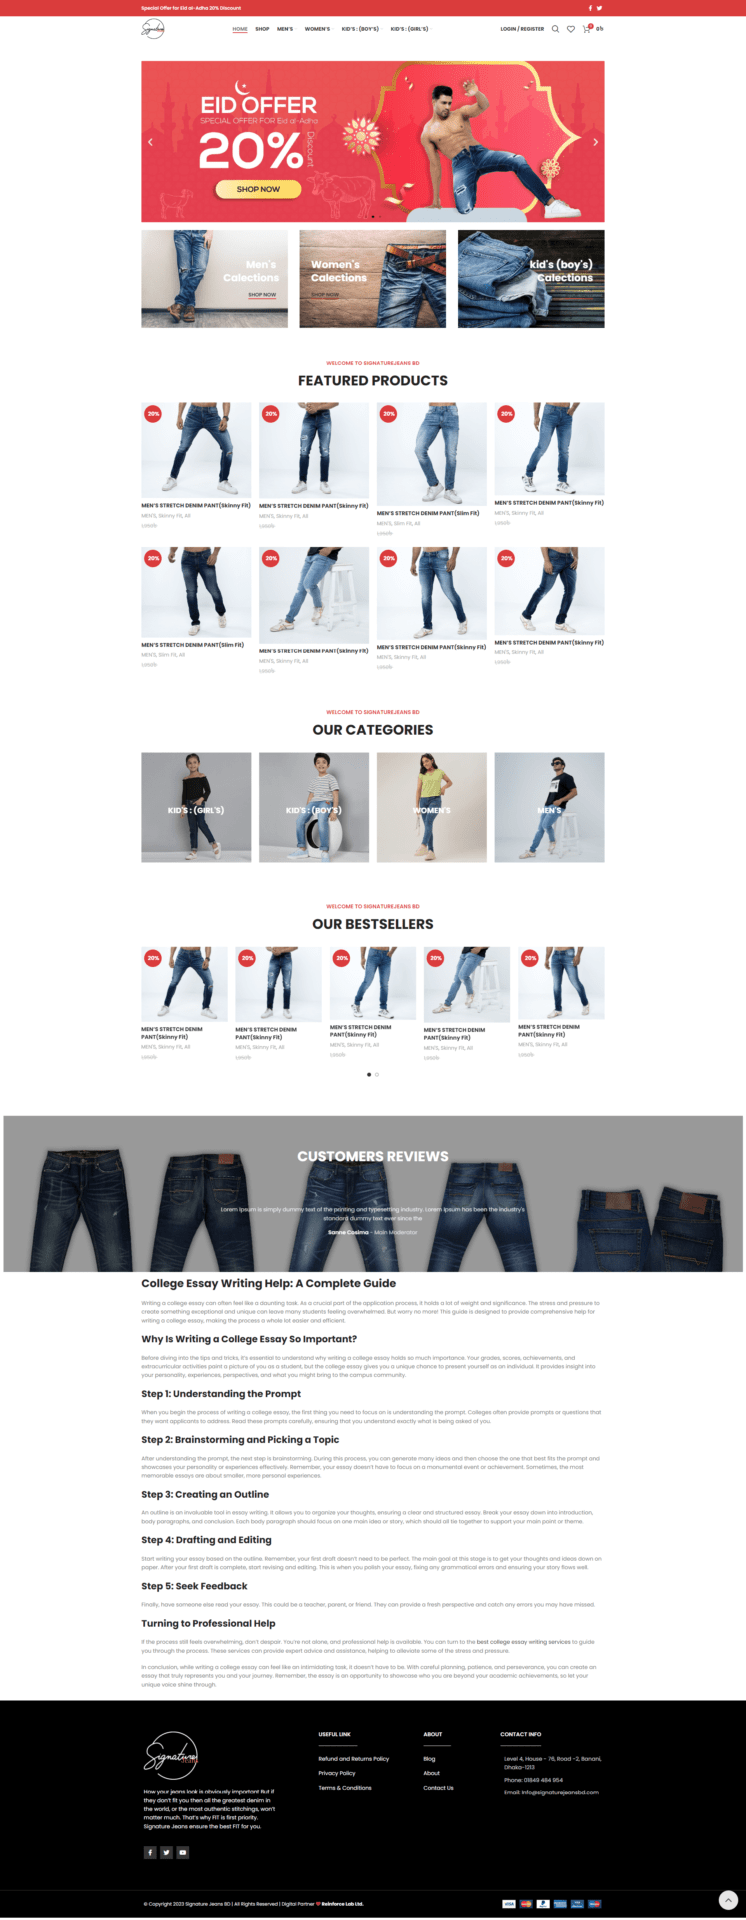 signature-jeans-BD-ecommerce-project-abu-sayed